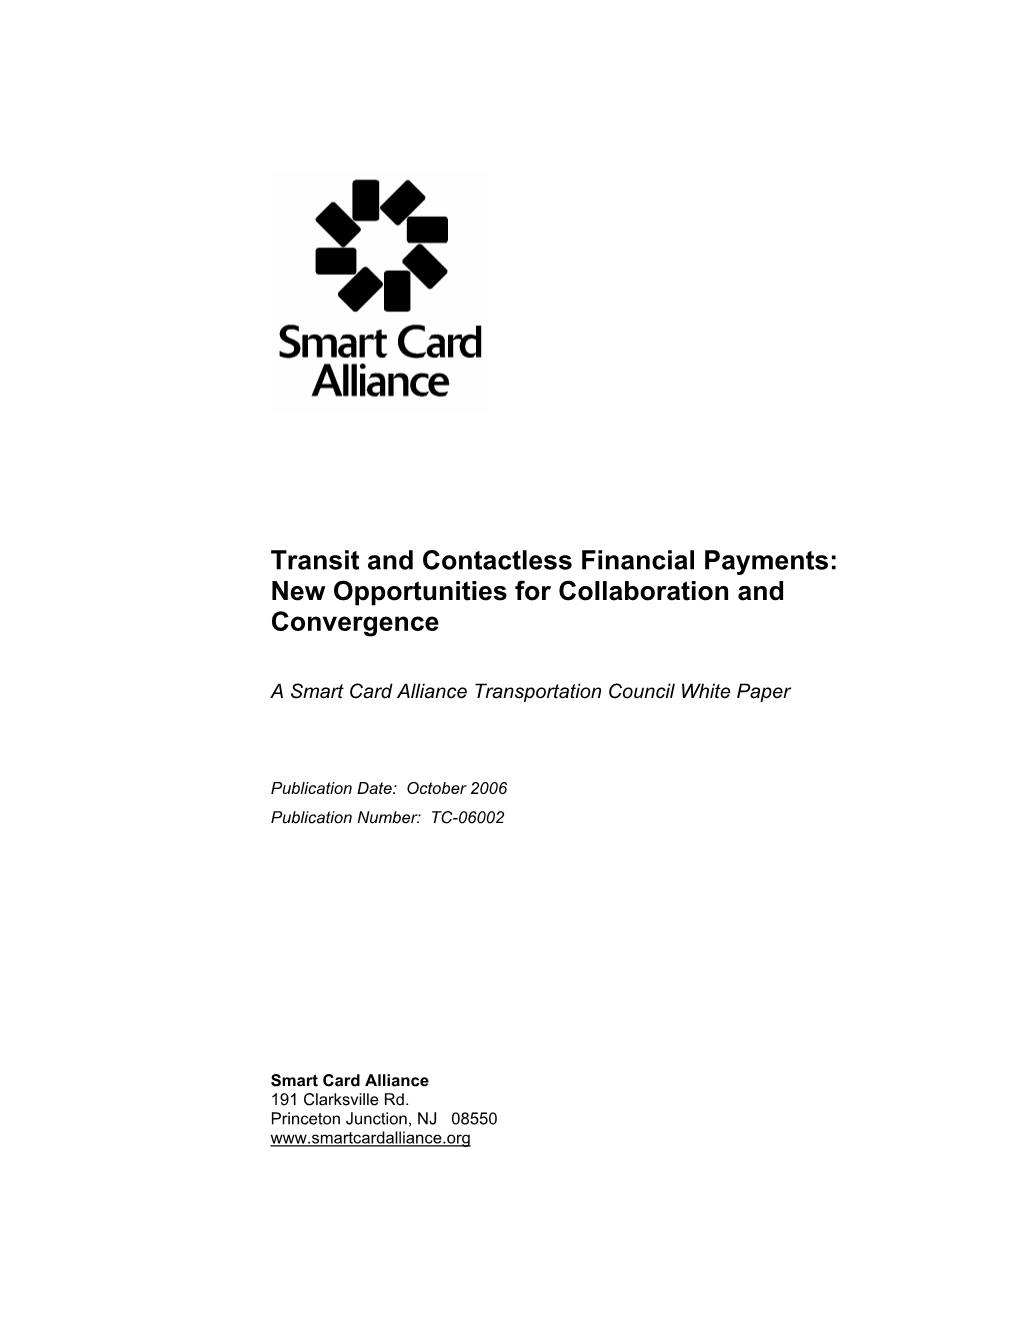 Transit and Contactless Financial Payments: New Opportunities for Collaboration and Convergence